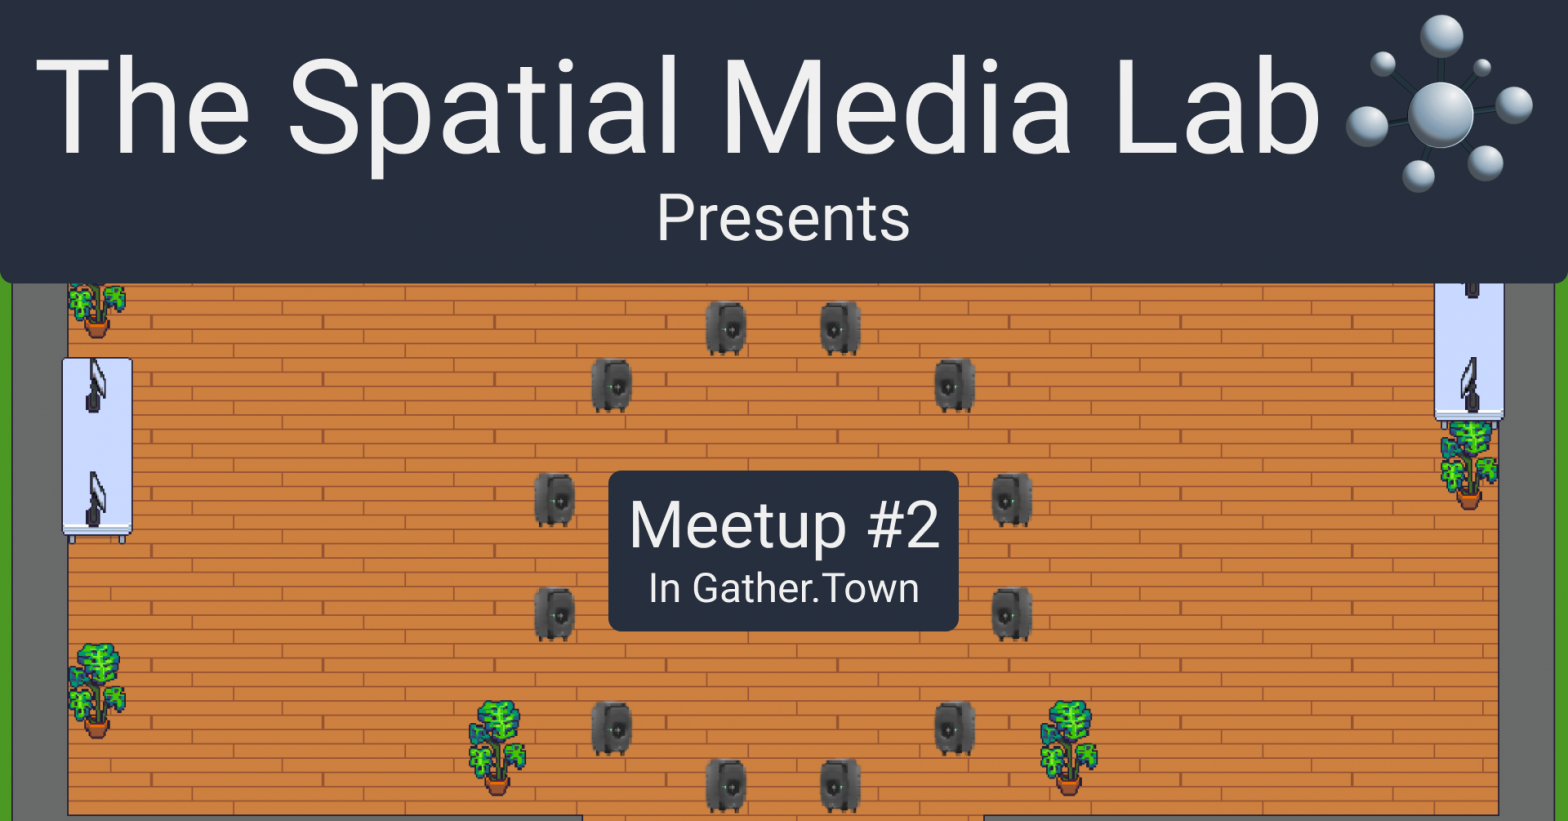 This is the Facebook Event Image for the Spatial Media Lab Meetup #2